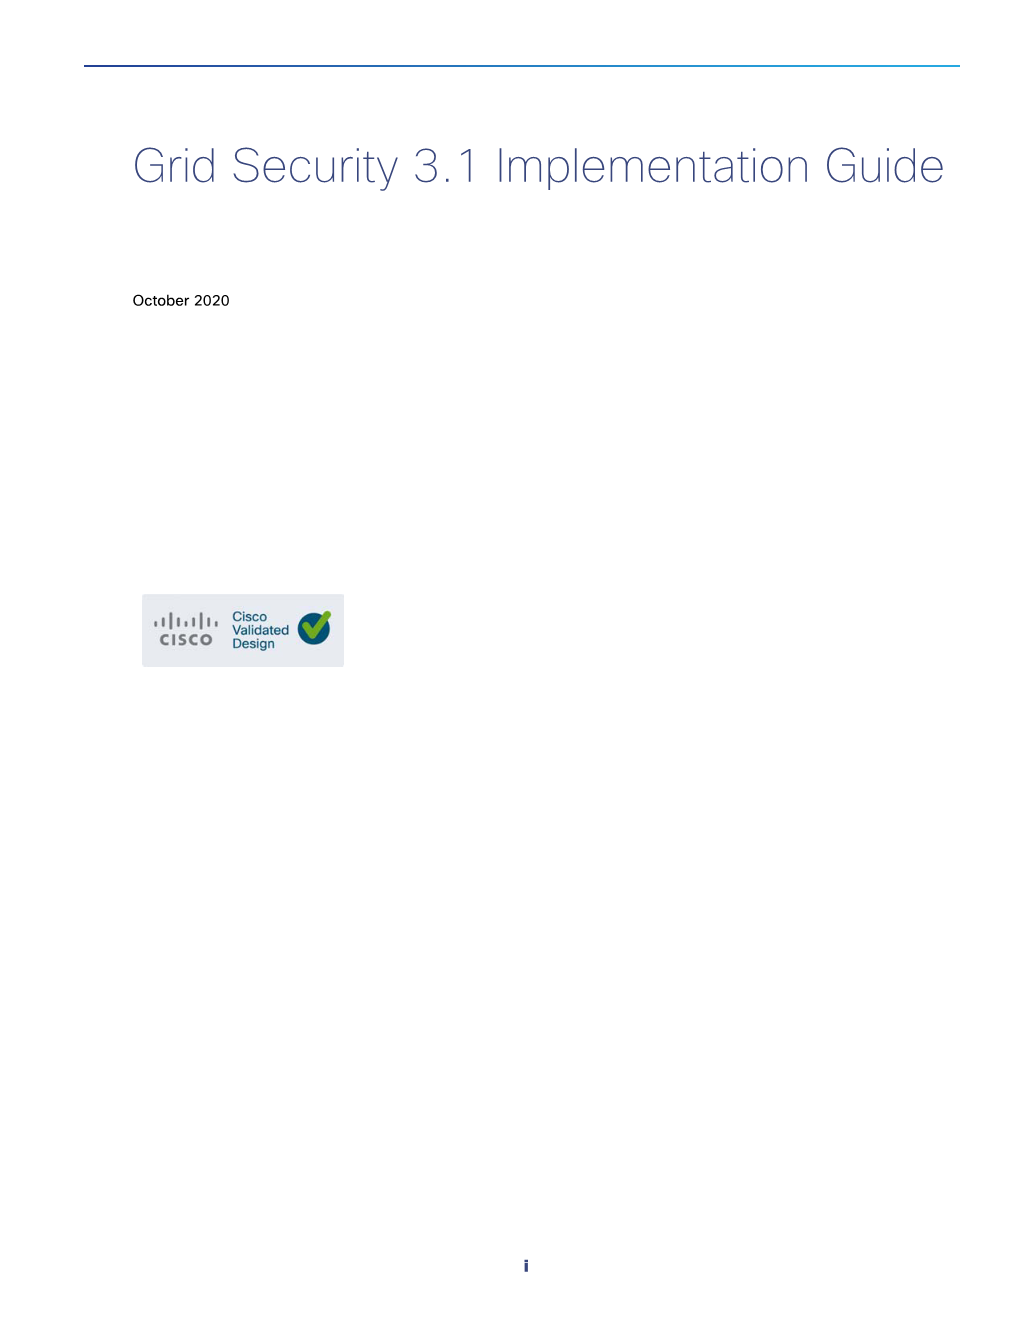 Grid Security Implementation Guide